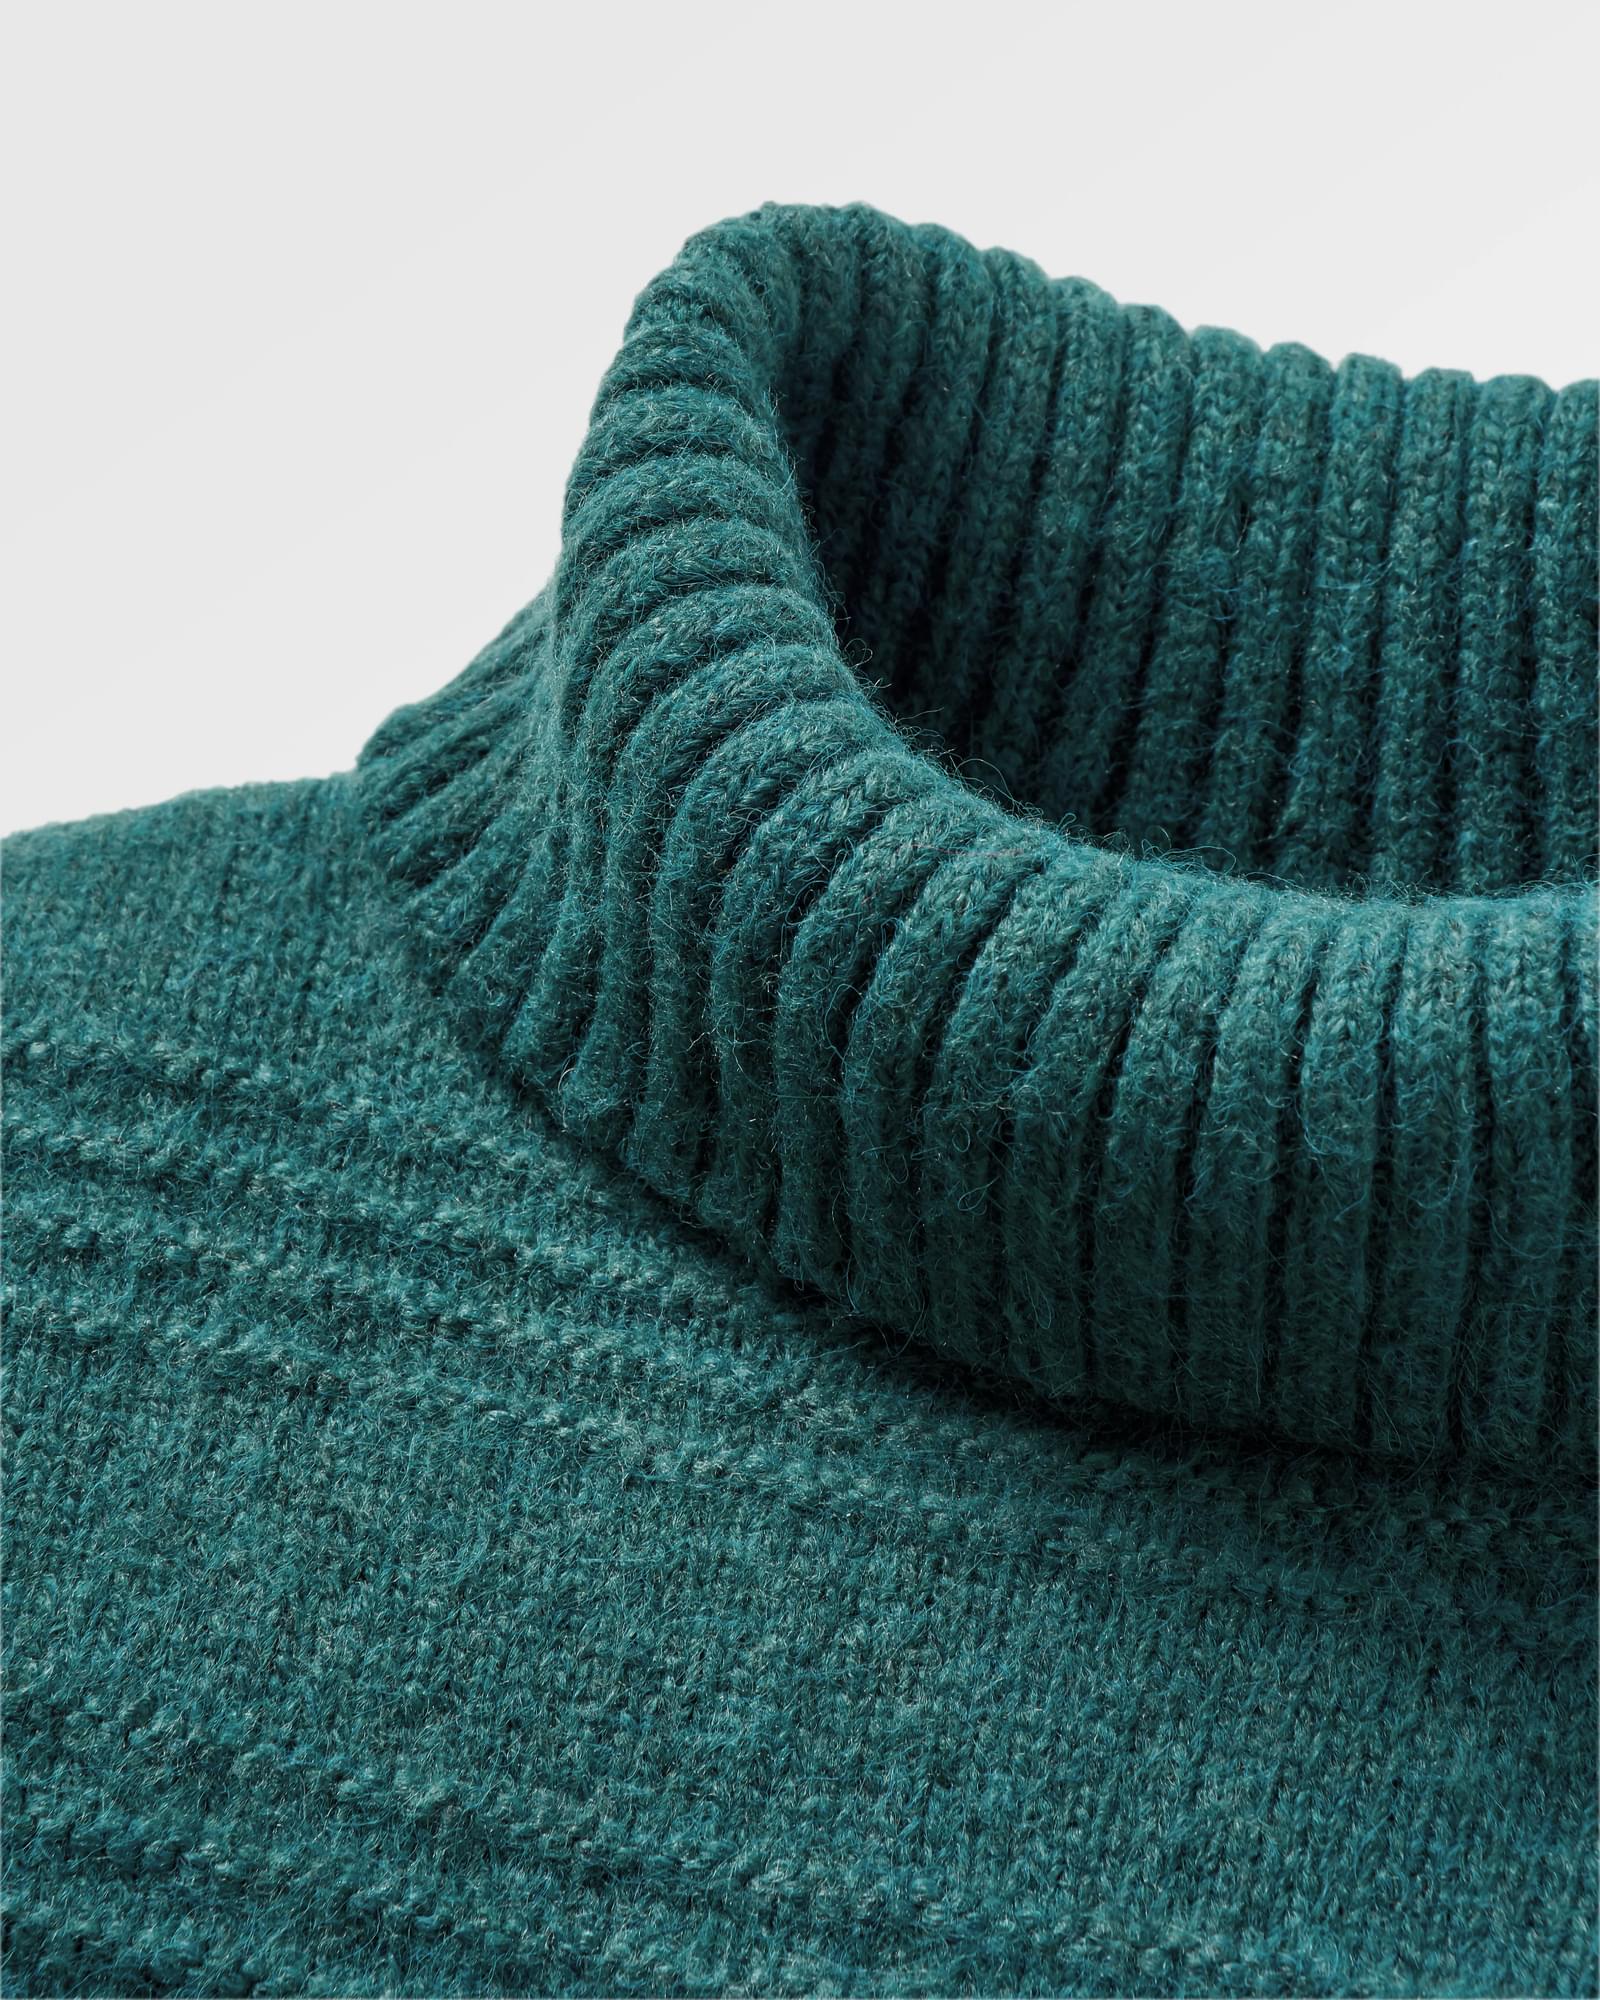 Snug Oversized Recycled Knitted Jumper - Mediterranean